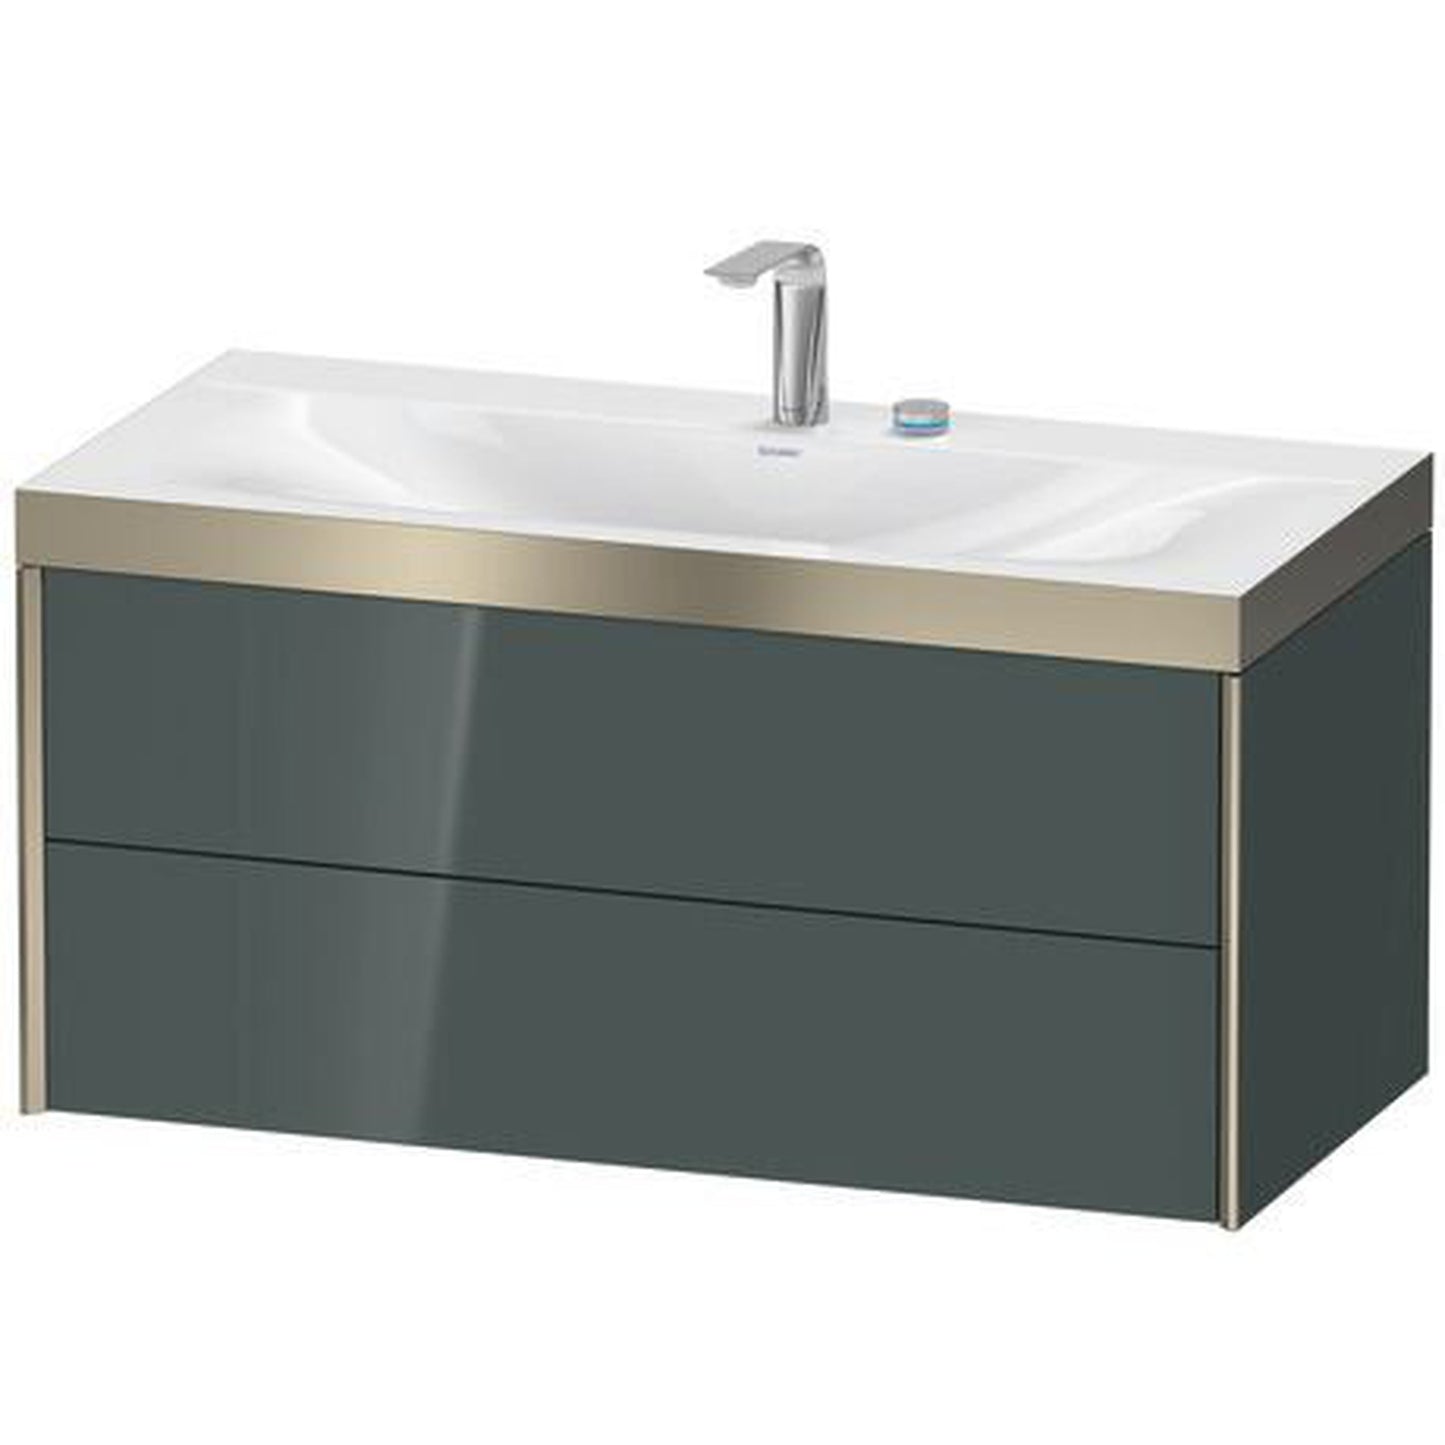 Duravit Xviu 39" x 20" x 19" Two Drawer C-Bonded Wall-Mount Vanity Kit With Two Tap Holes, Dolomite Gray (XV4616EB138P)